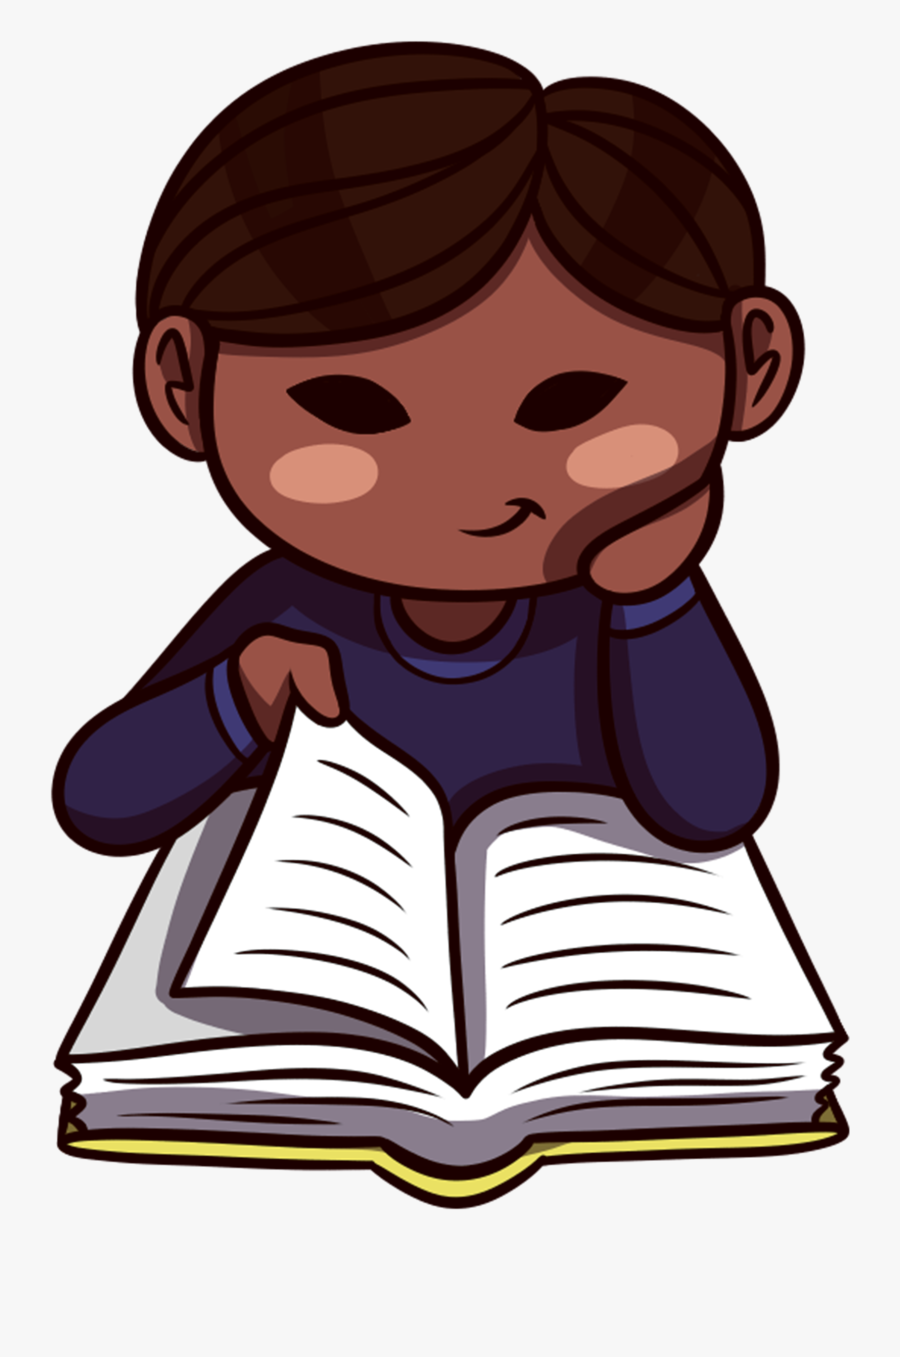 Boy Reading Peacefully - Child Reading Clip Art, Transparent Clipart